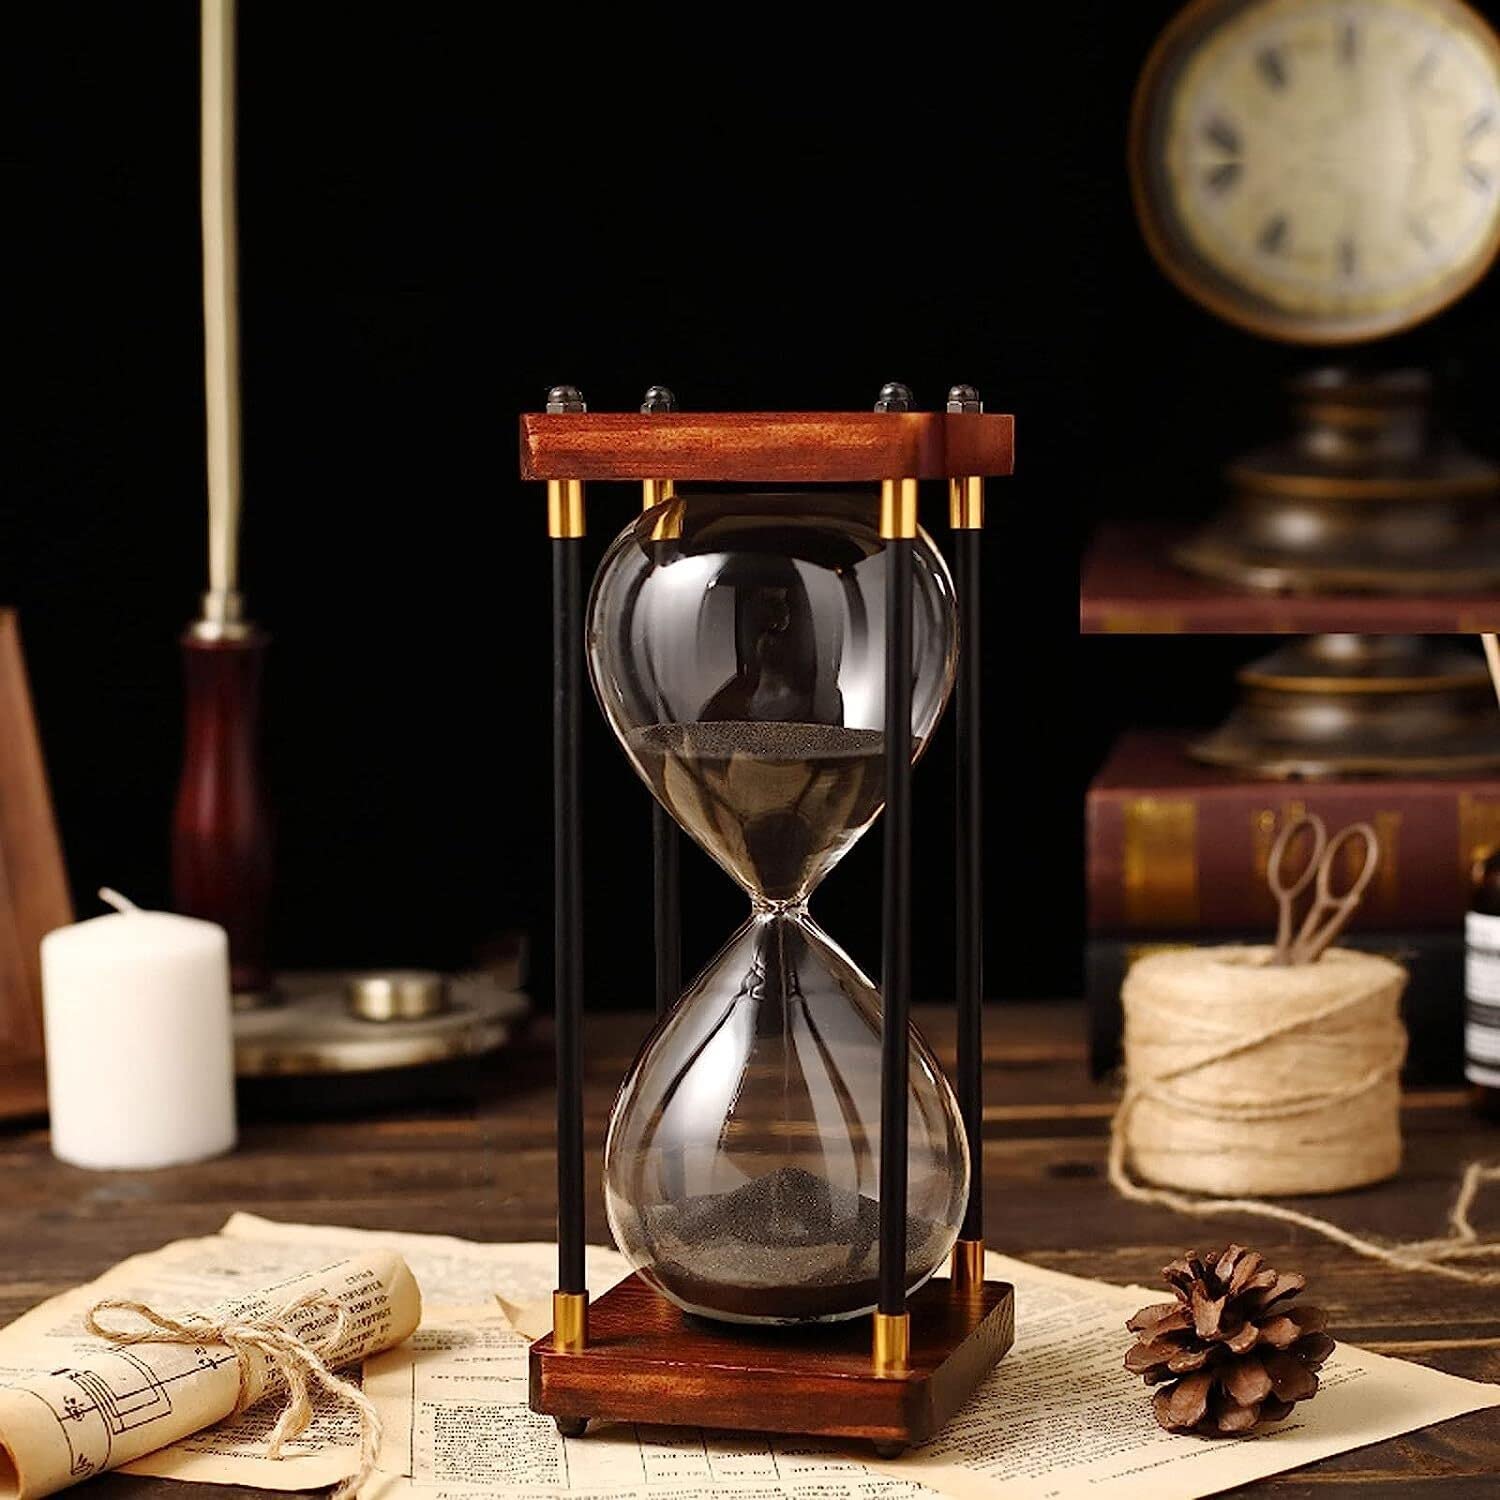 Clock with a timer or hourglass